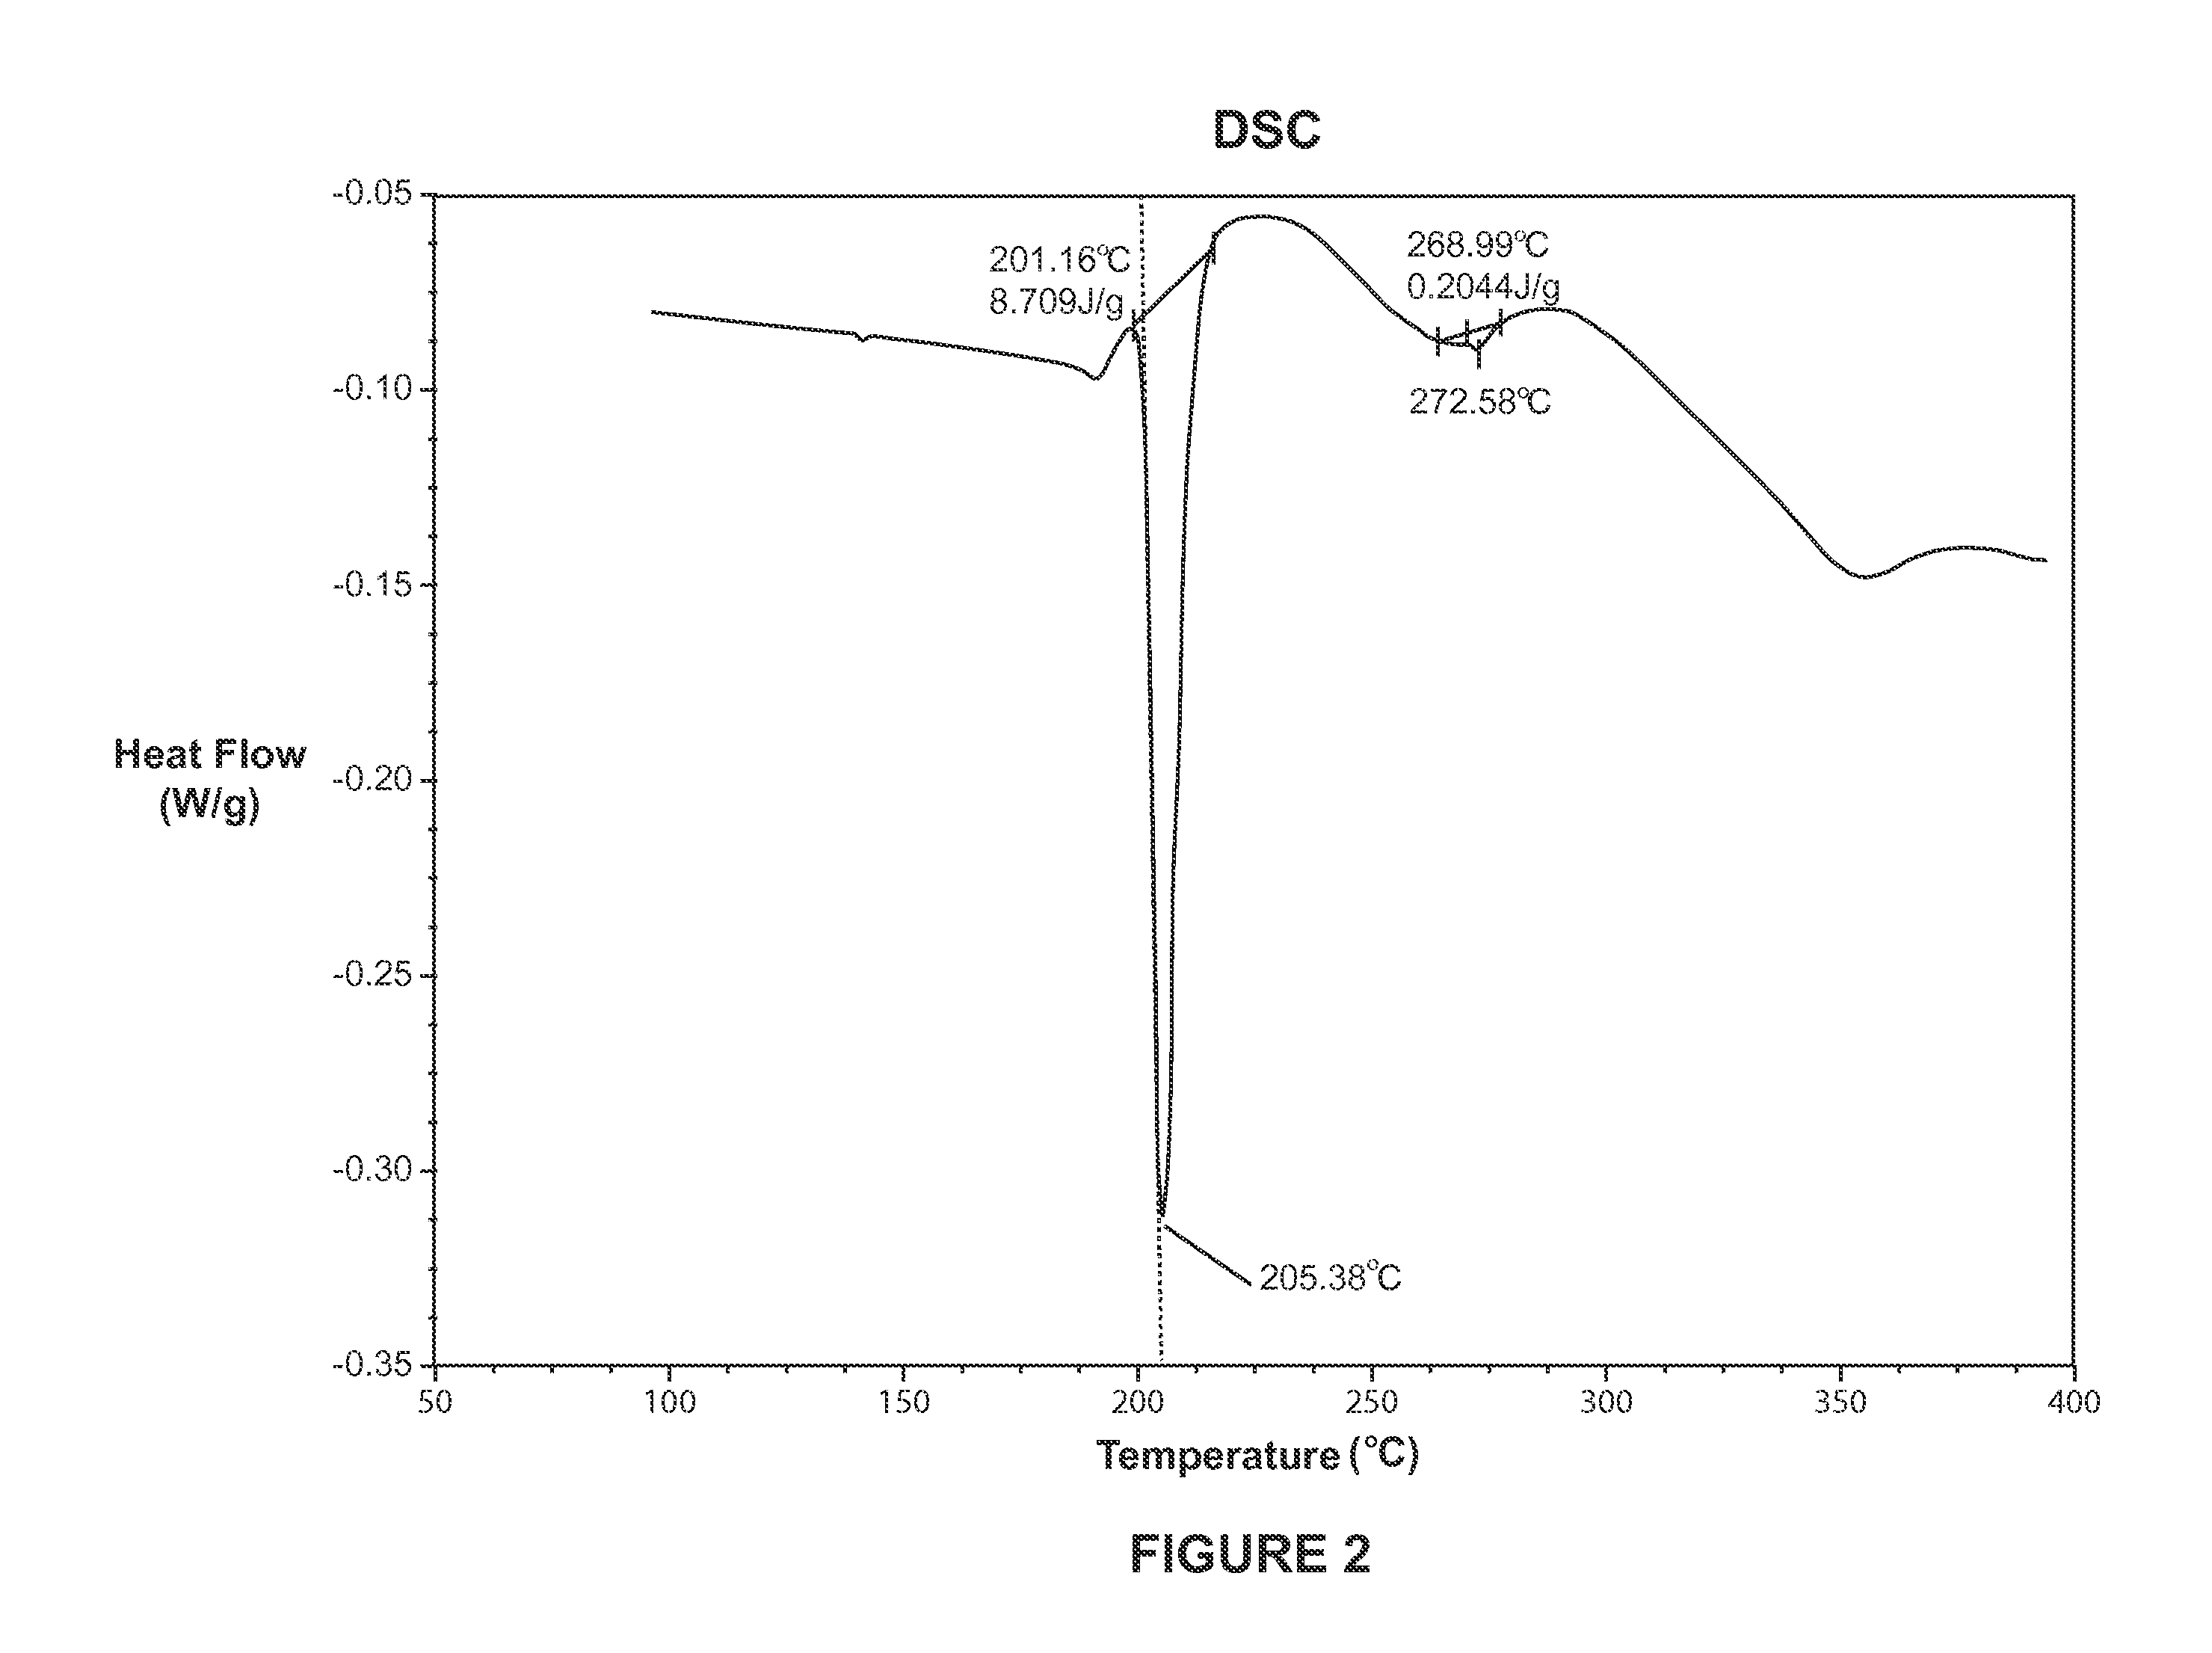 Conductive compositions containing blended alloy fillers